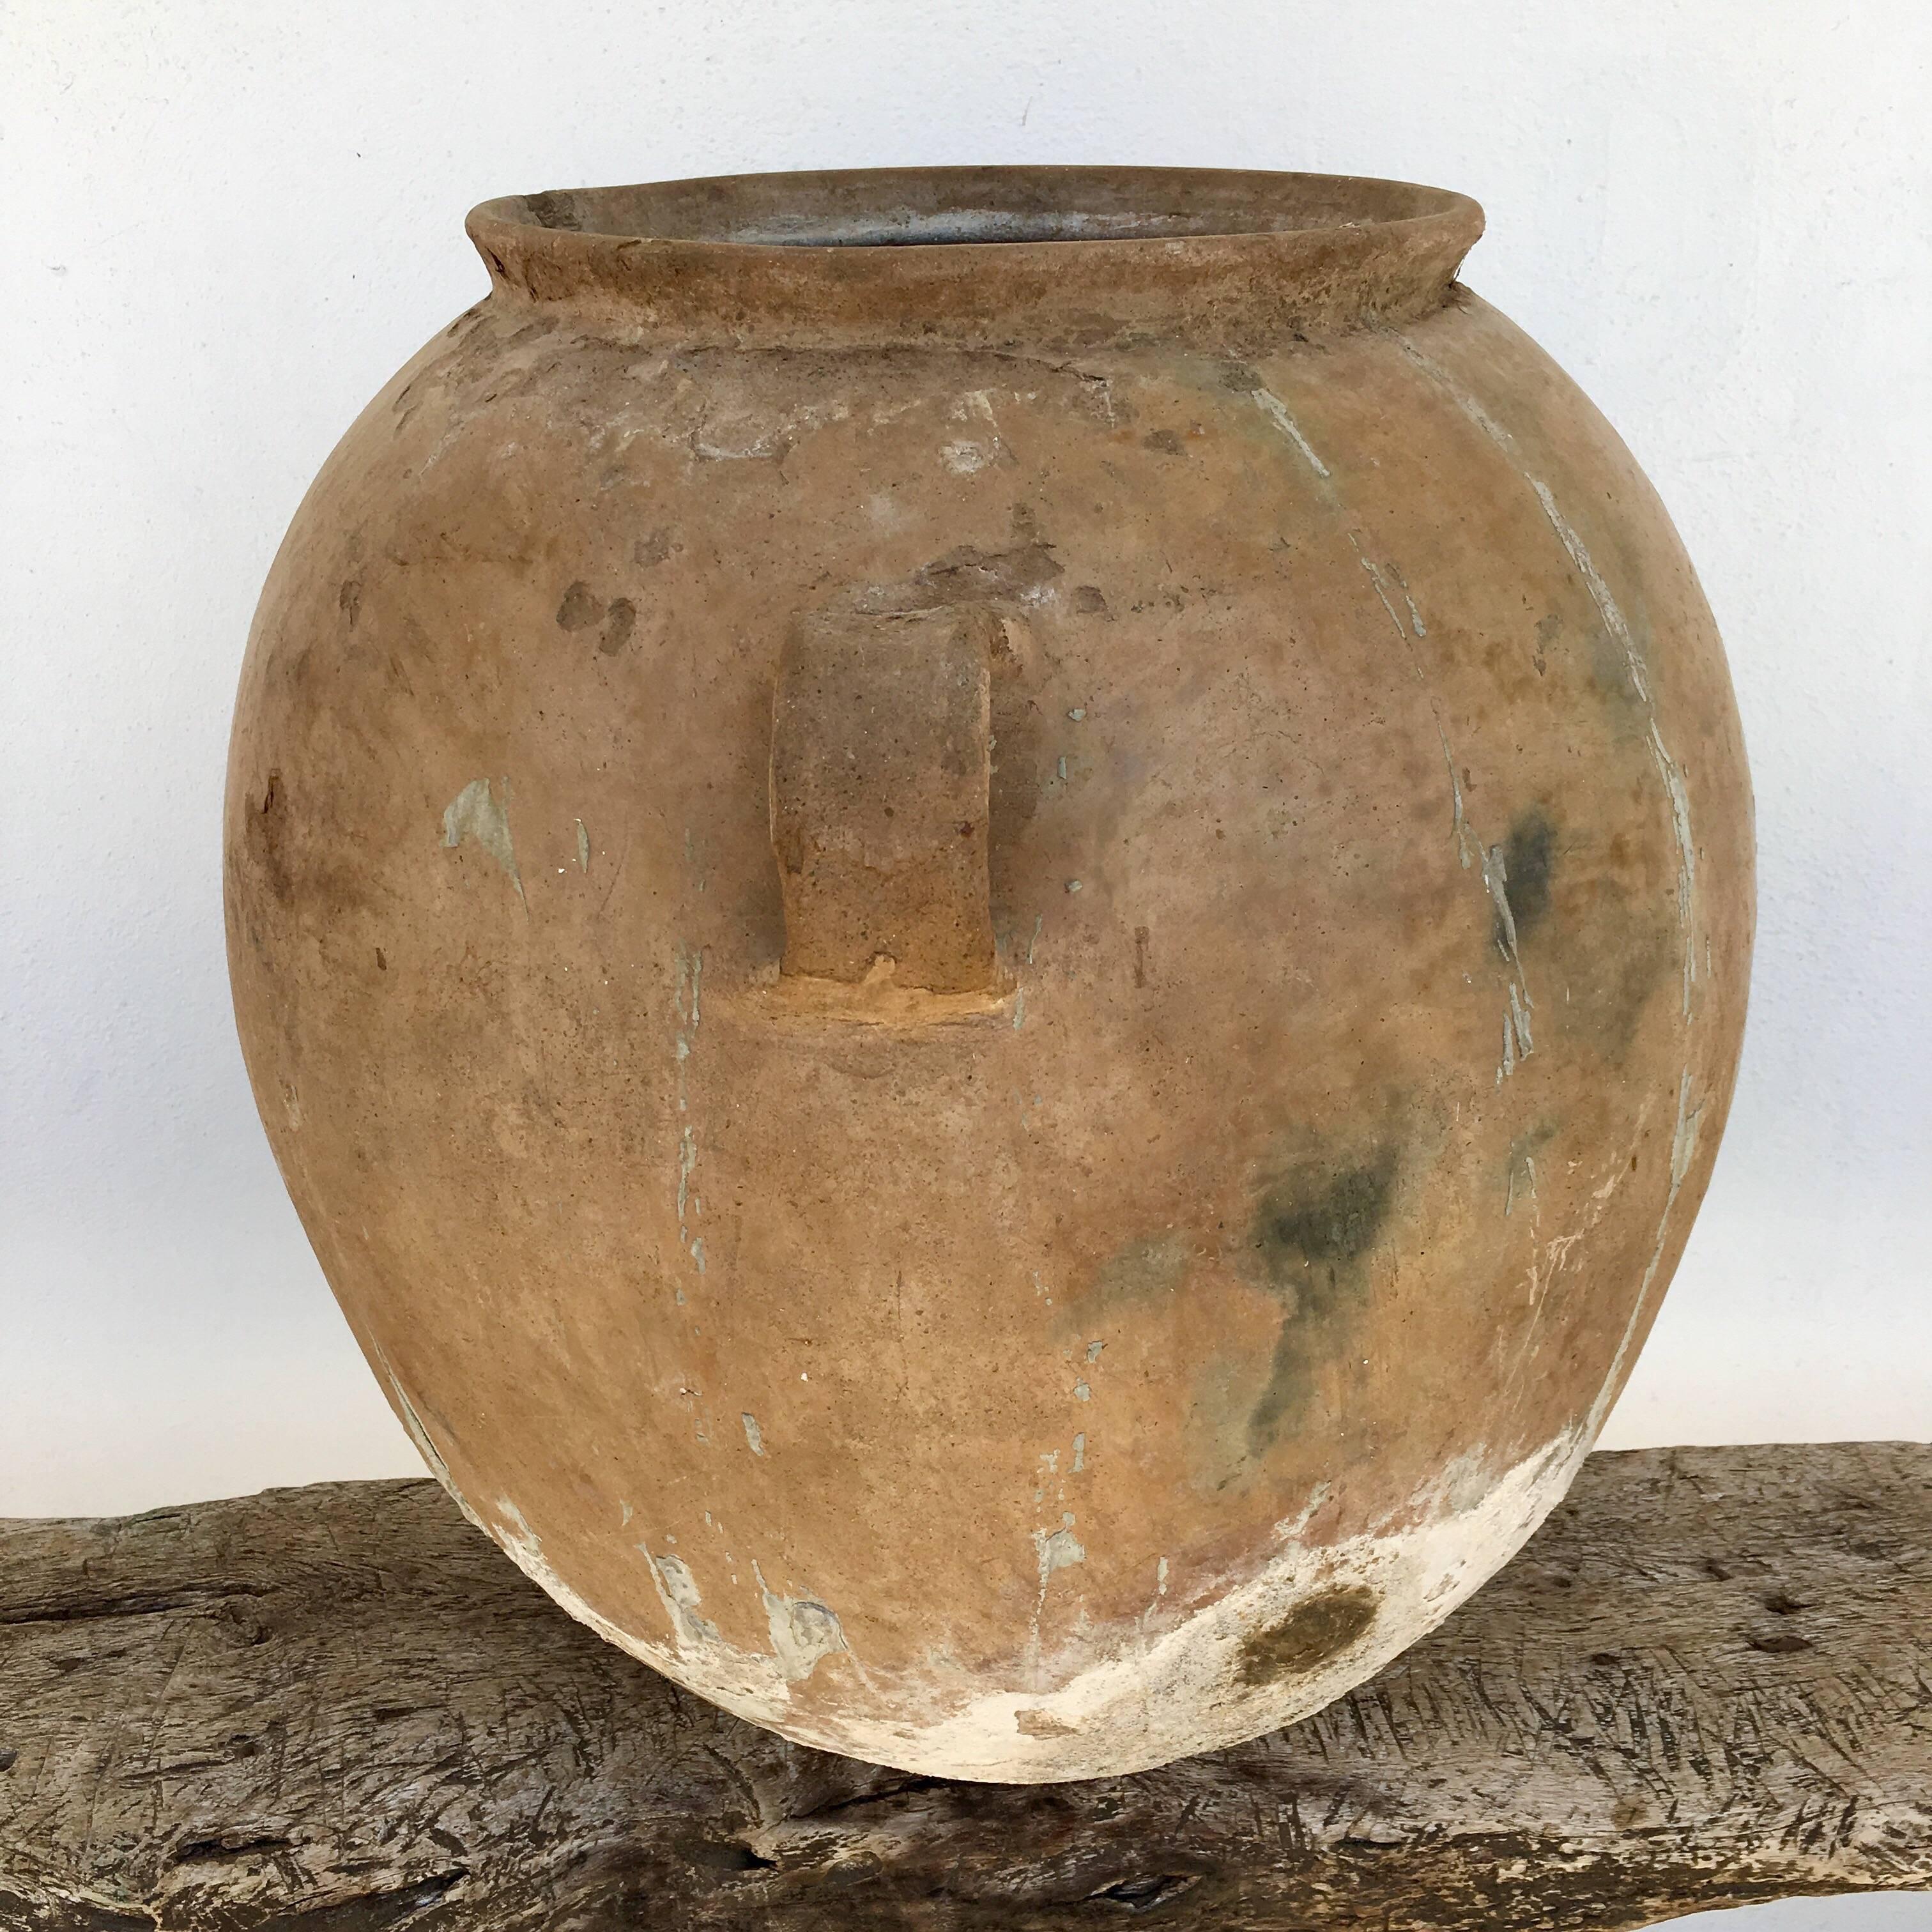 Beautifully shaped water vessel from Los Reyes Mezontla, Puebla, circa 1970s. Excellent form and fire markings from the Popoloca indigenous people of central Mexico. It has taken approximately 6 years to obtain these one of a kind pieces. There are